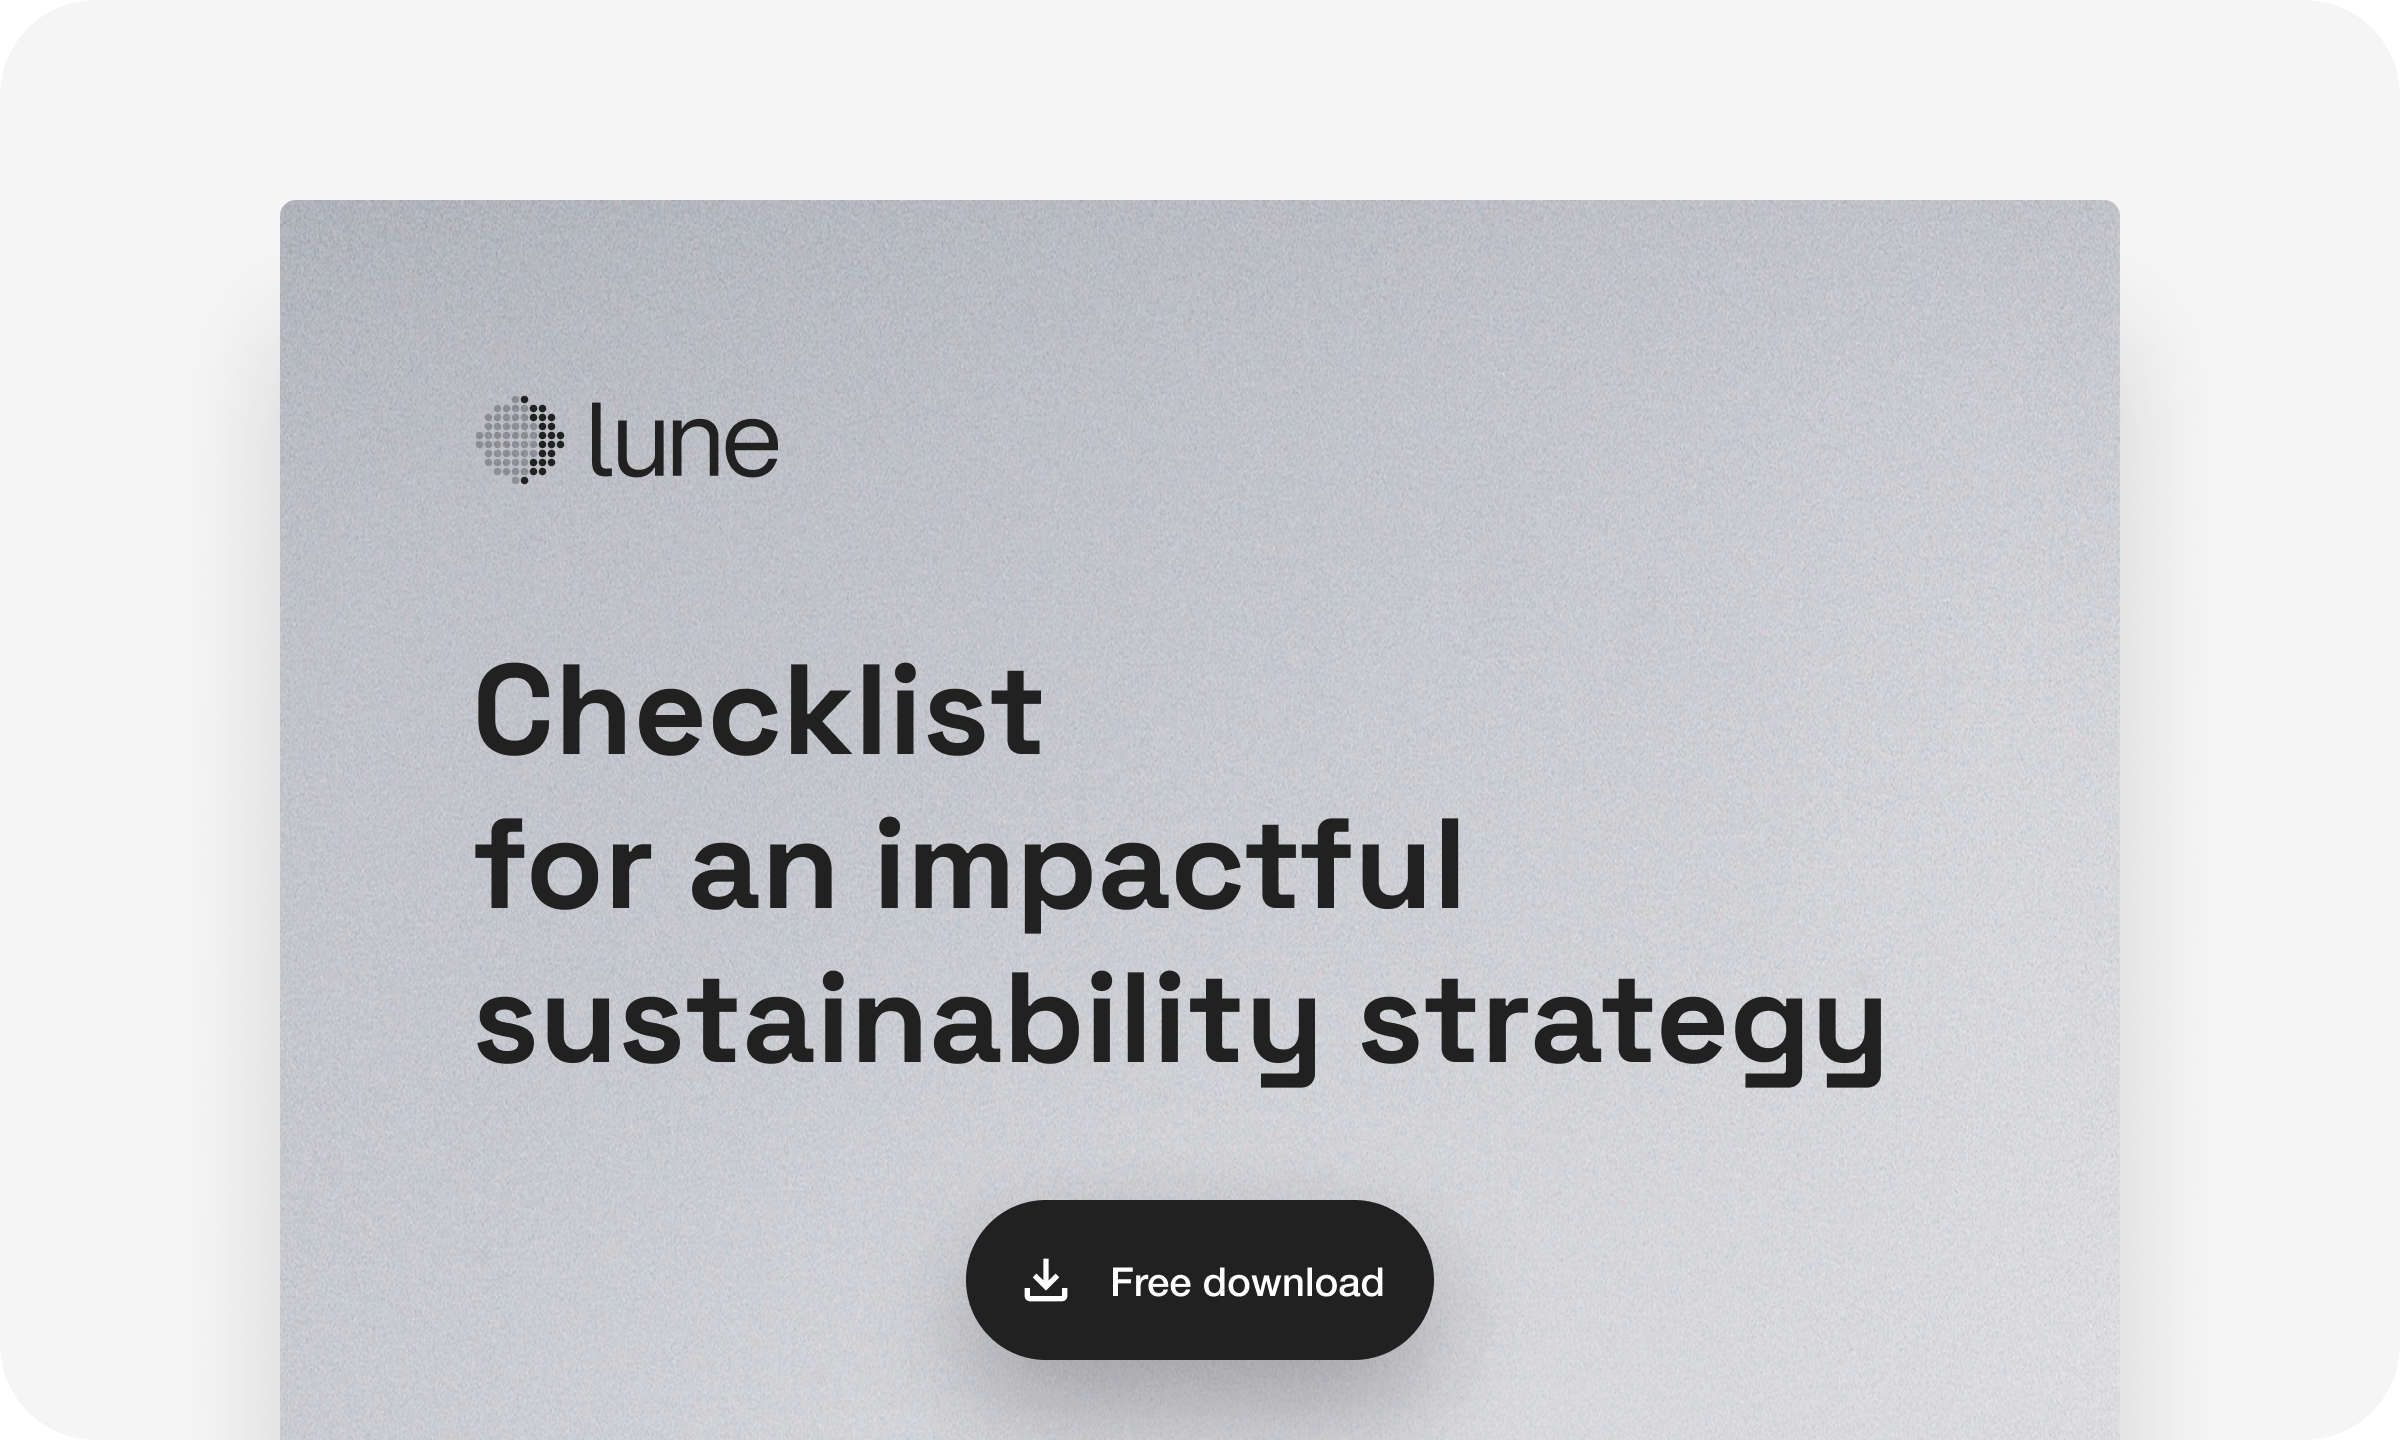 Checklist for an impactful sustainability strategy